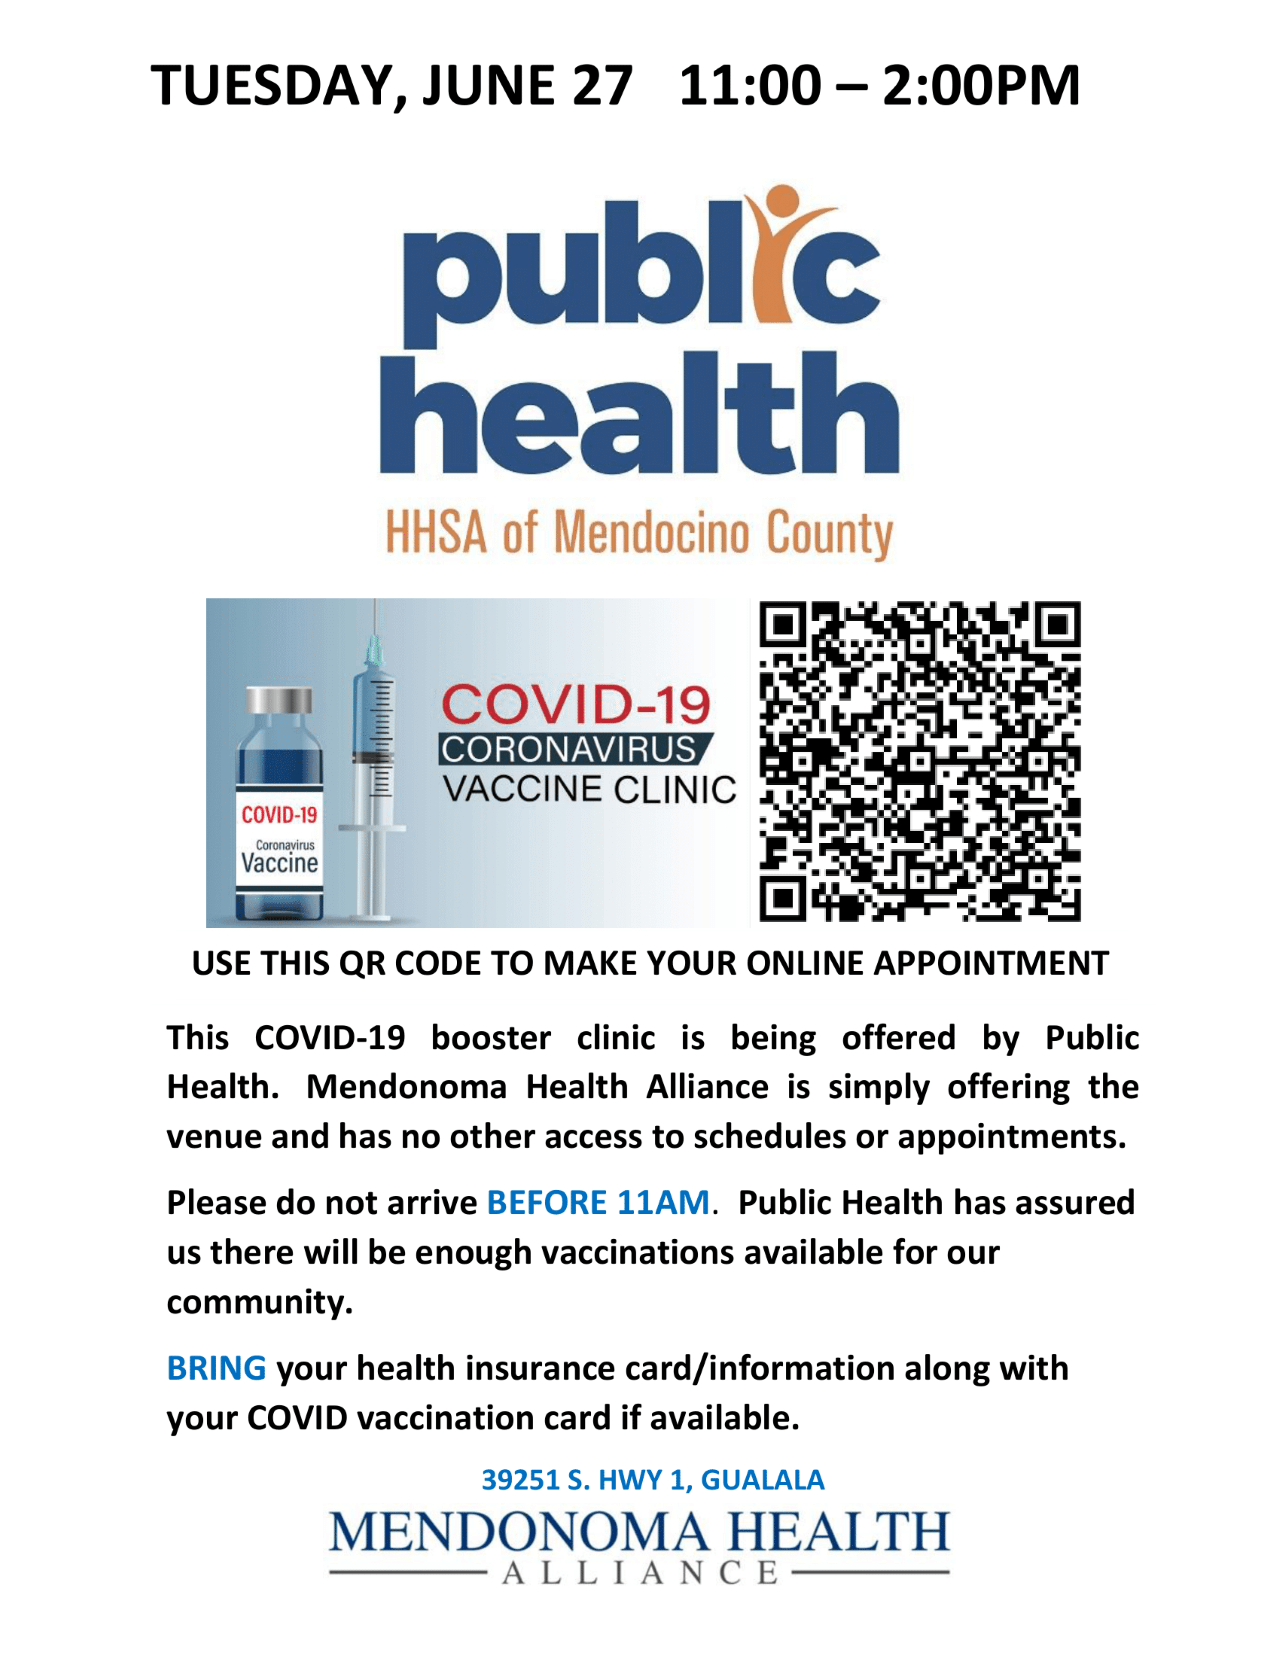 Vaccination clinic flyer includes vaccine bottle labeled coronavirus and a syringe next to it pointed upwards. Mendocino county public health logo included with a drawing of a person like image with arms lifted up in orange.